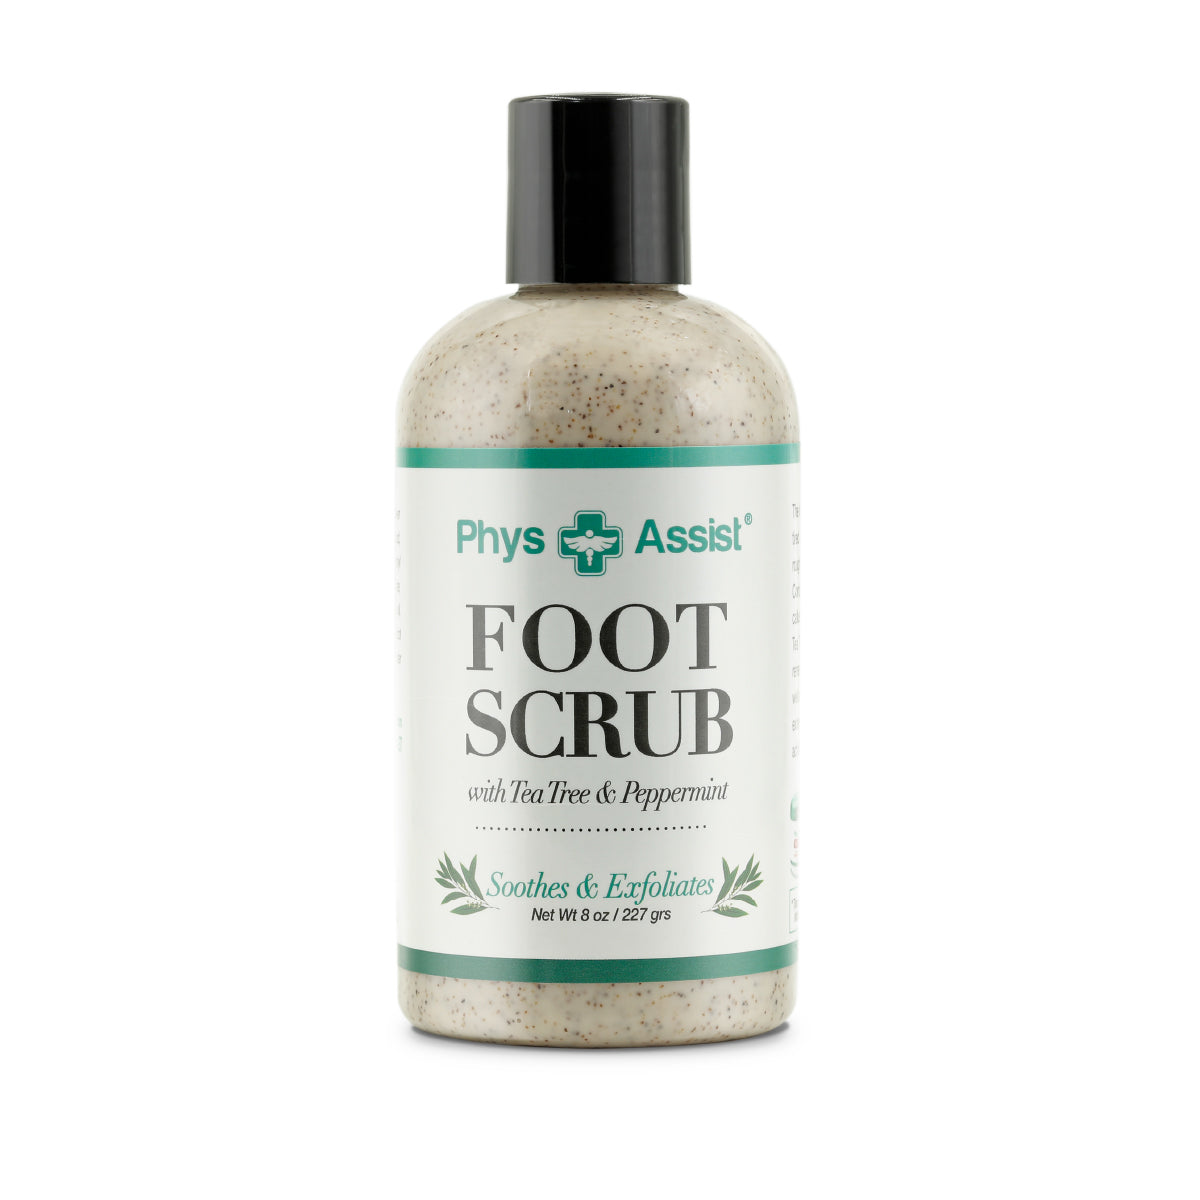 https://www.momjunction.com/wp-content/uploads/product-images/physassist-foot-scrub-with-tea-tree-and-peppermint_afl34.jpg